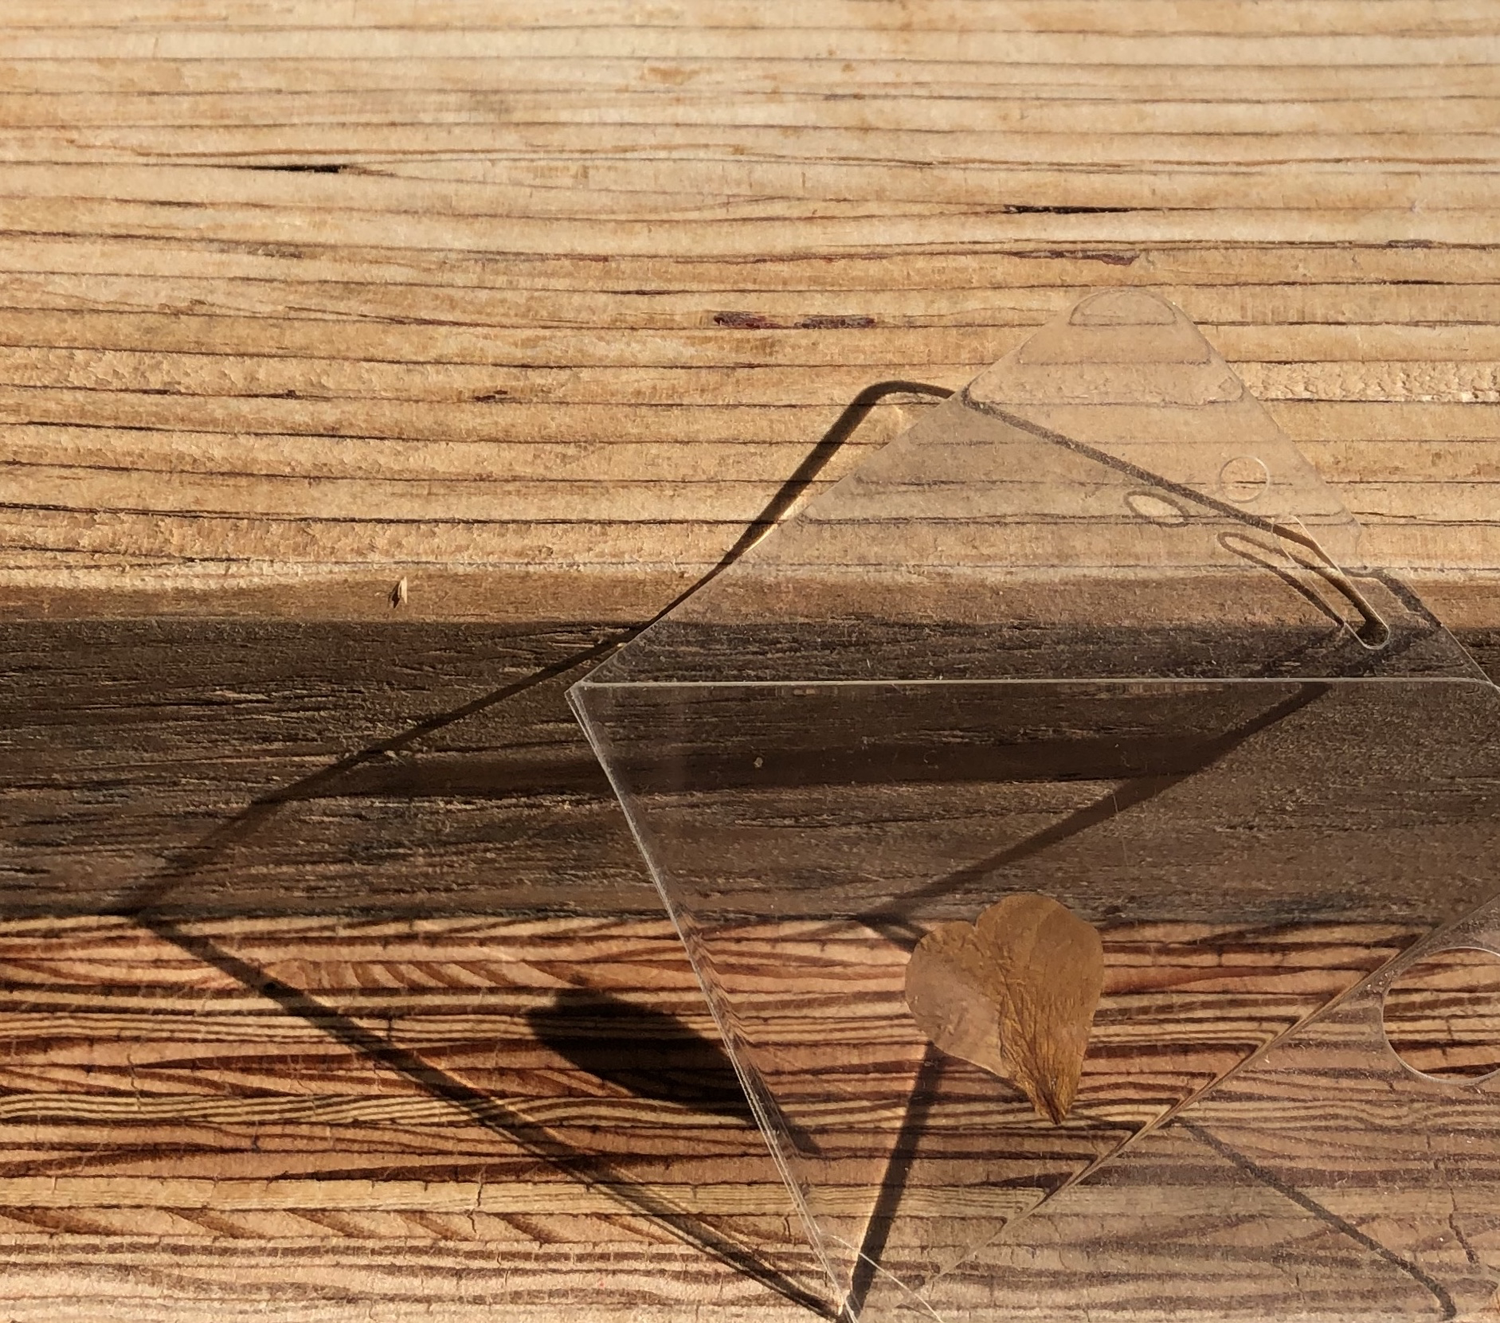 glass screen protector that has a rose petal encased leaning against plywood